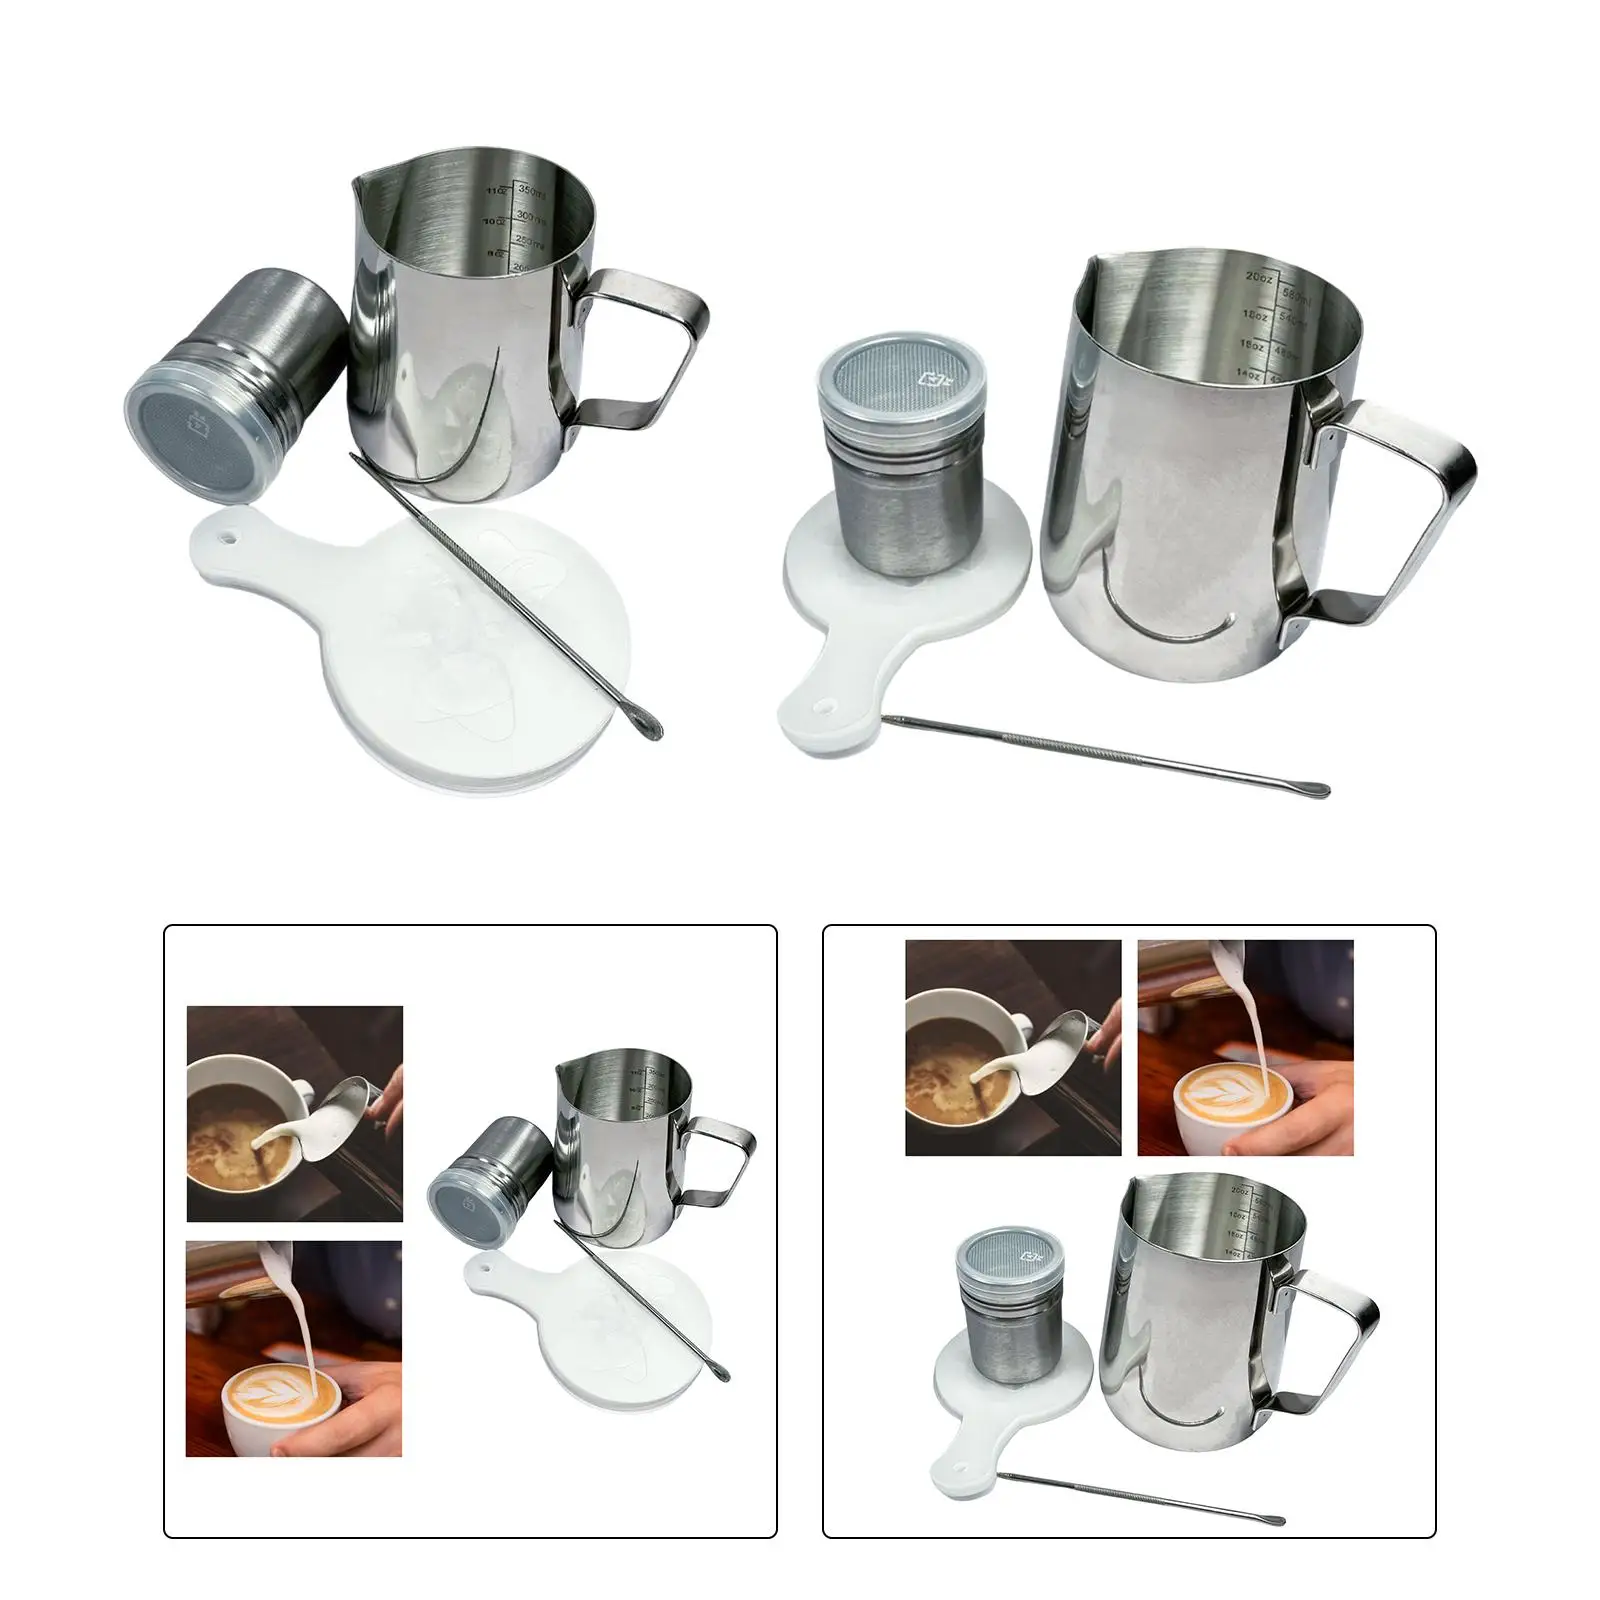 Stainless Steel Milk Frothing Mugs Frother Steamer Cup Espresso Steaming Cups Coffee Milk Frothing Jug Kitchen Cafe Home Kitchen